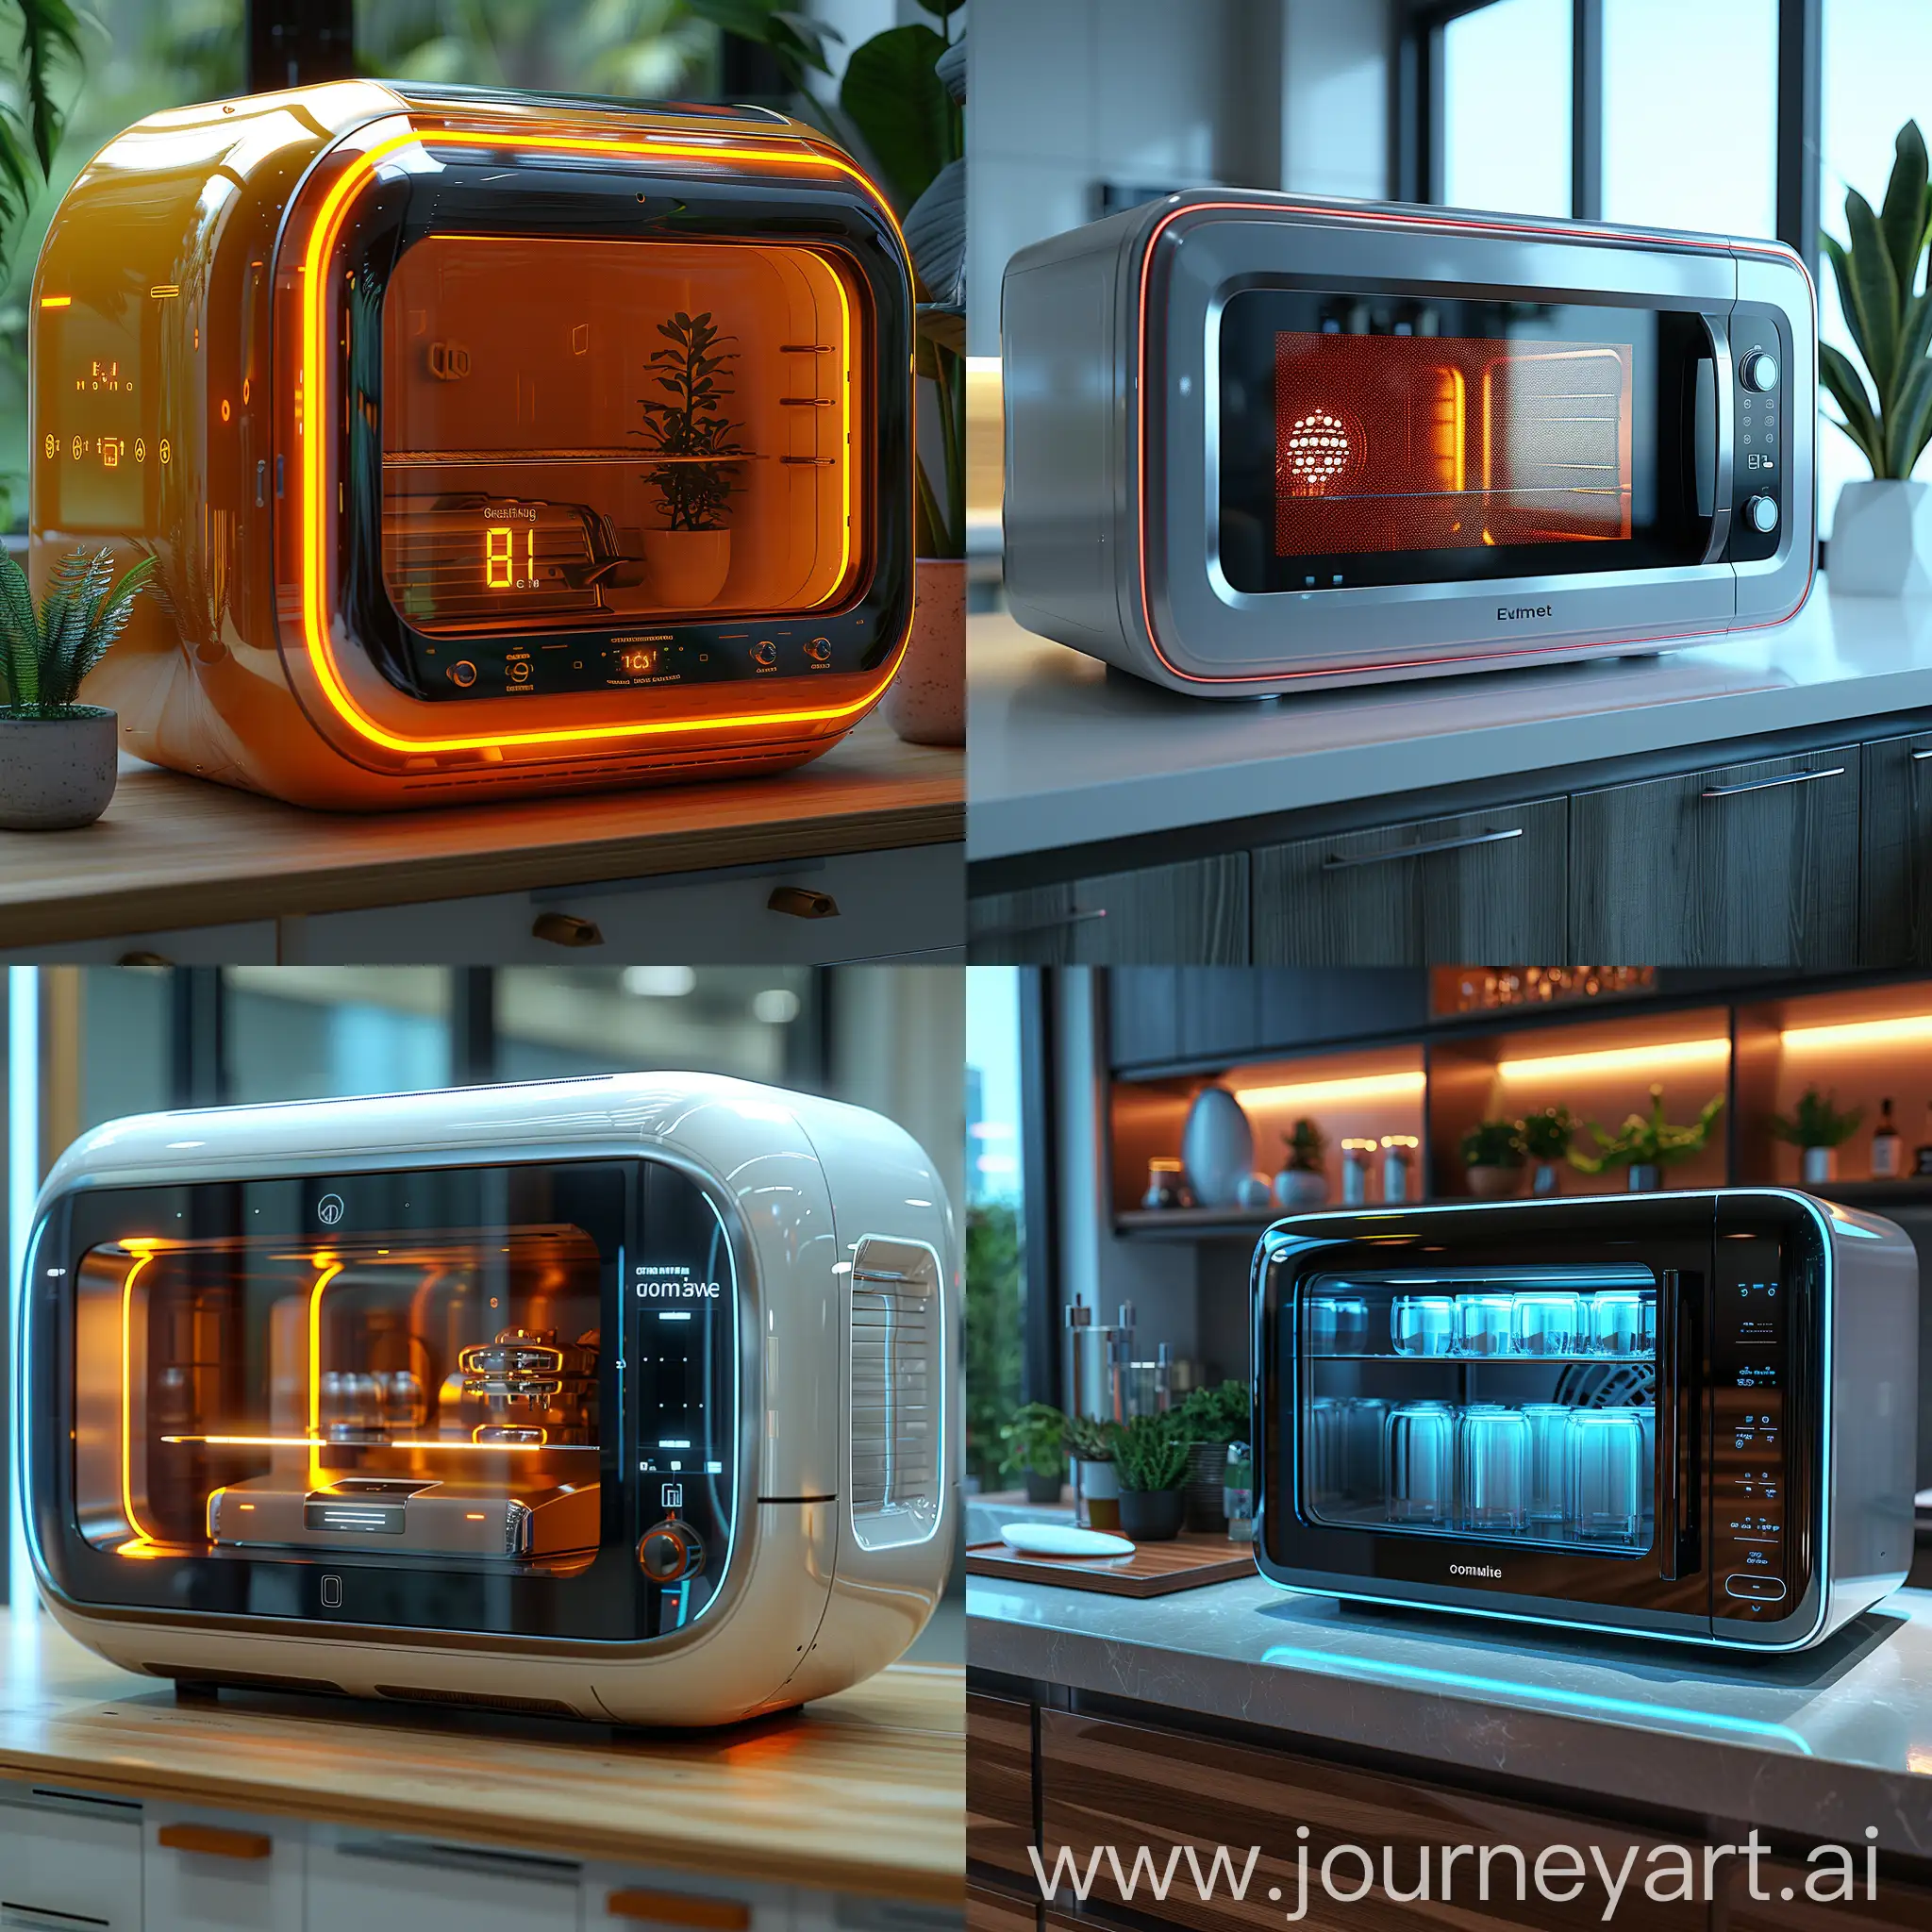 Futuristic-UltraModern-Microwave-with-Smart-Materials-and-HighTech-Design